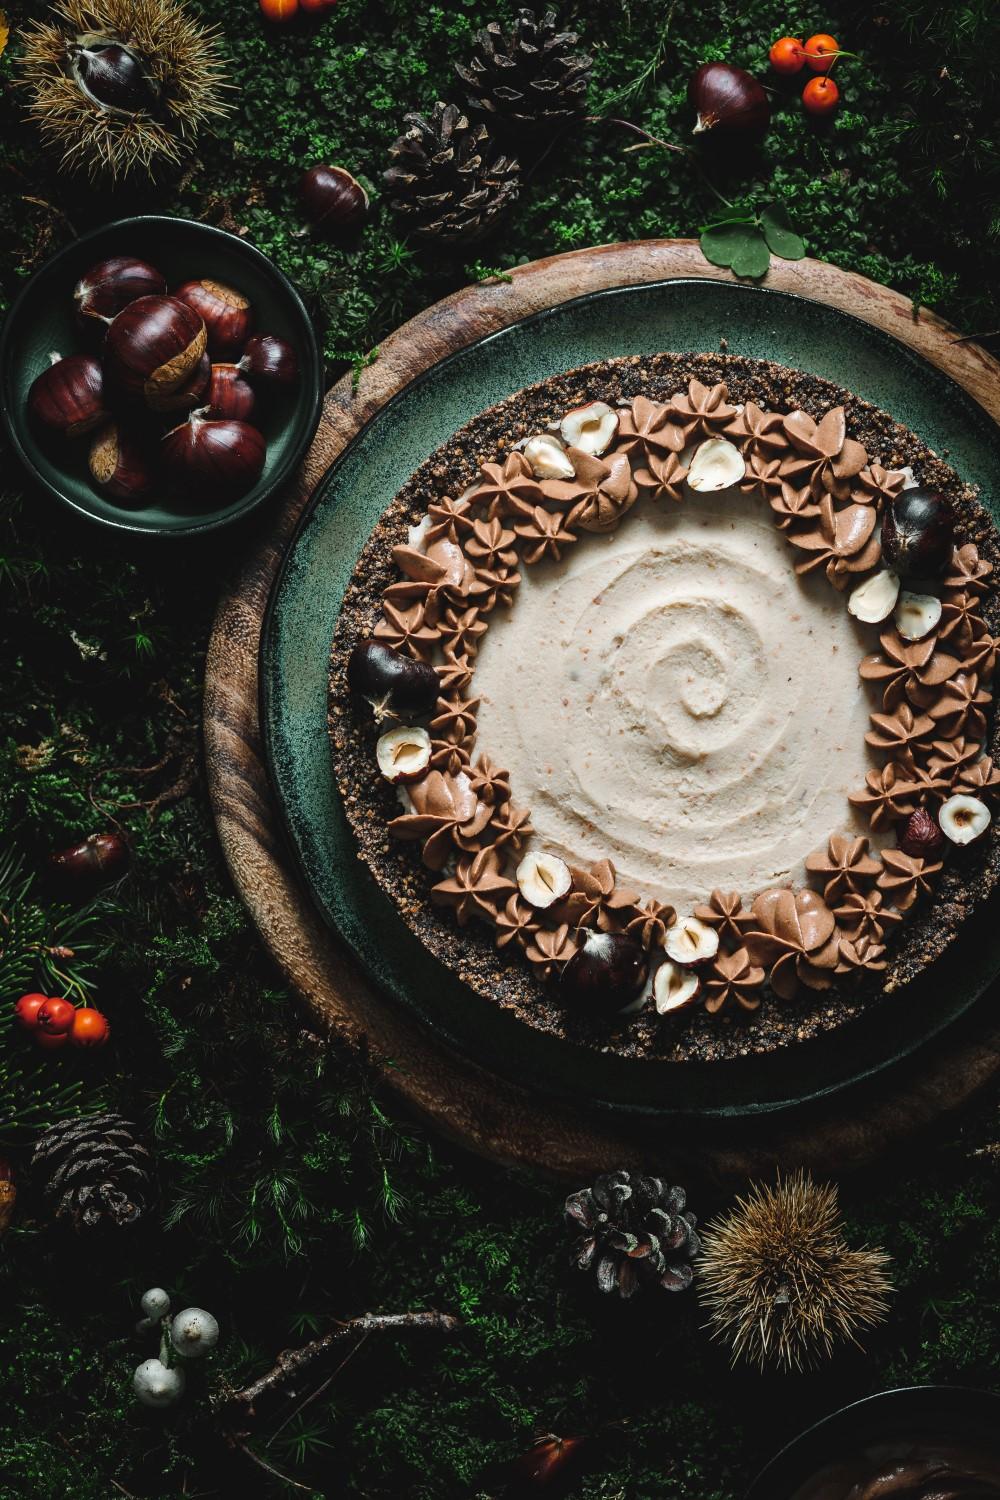 This no-bake chocolate chestnut pie is an indulgent autumn dessert that everyone likes. Surprise your guests with this recipe that is full of flavor.